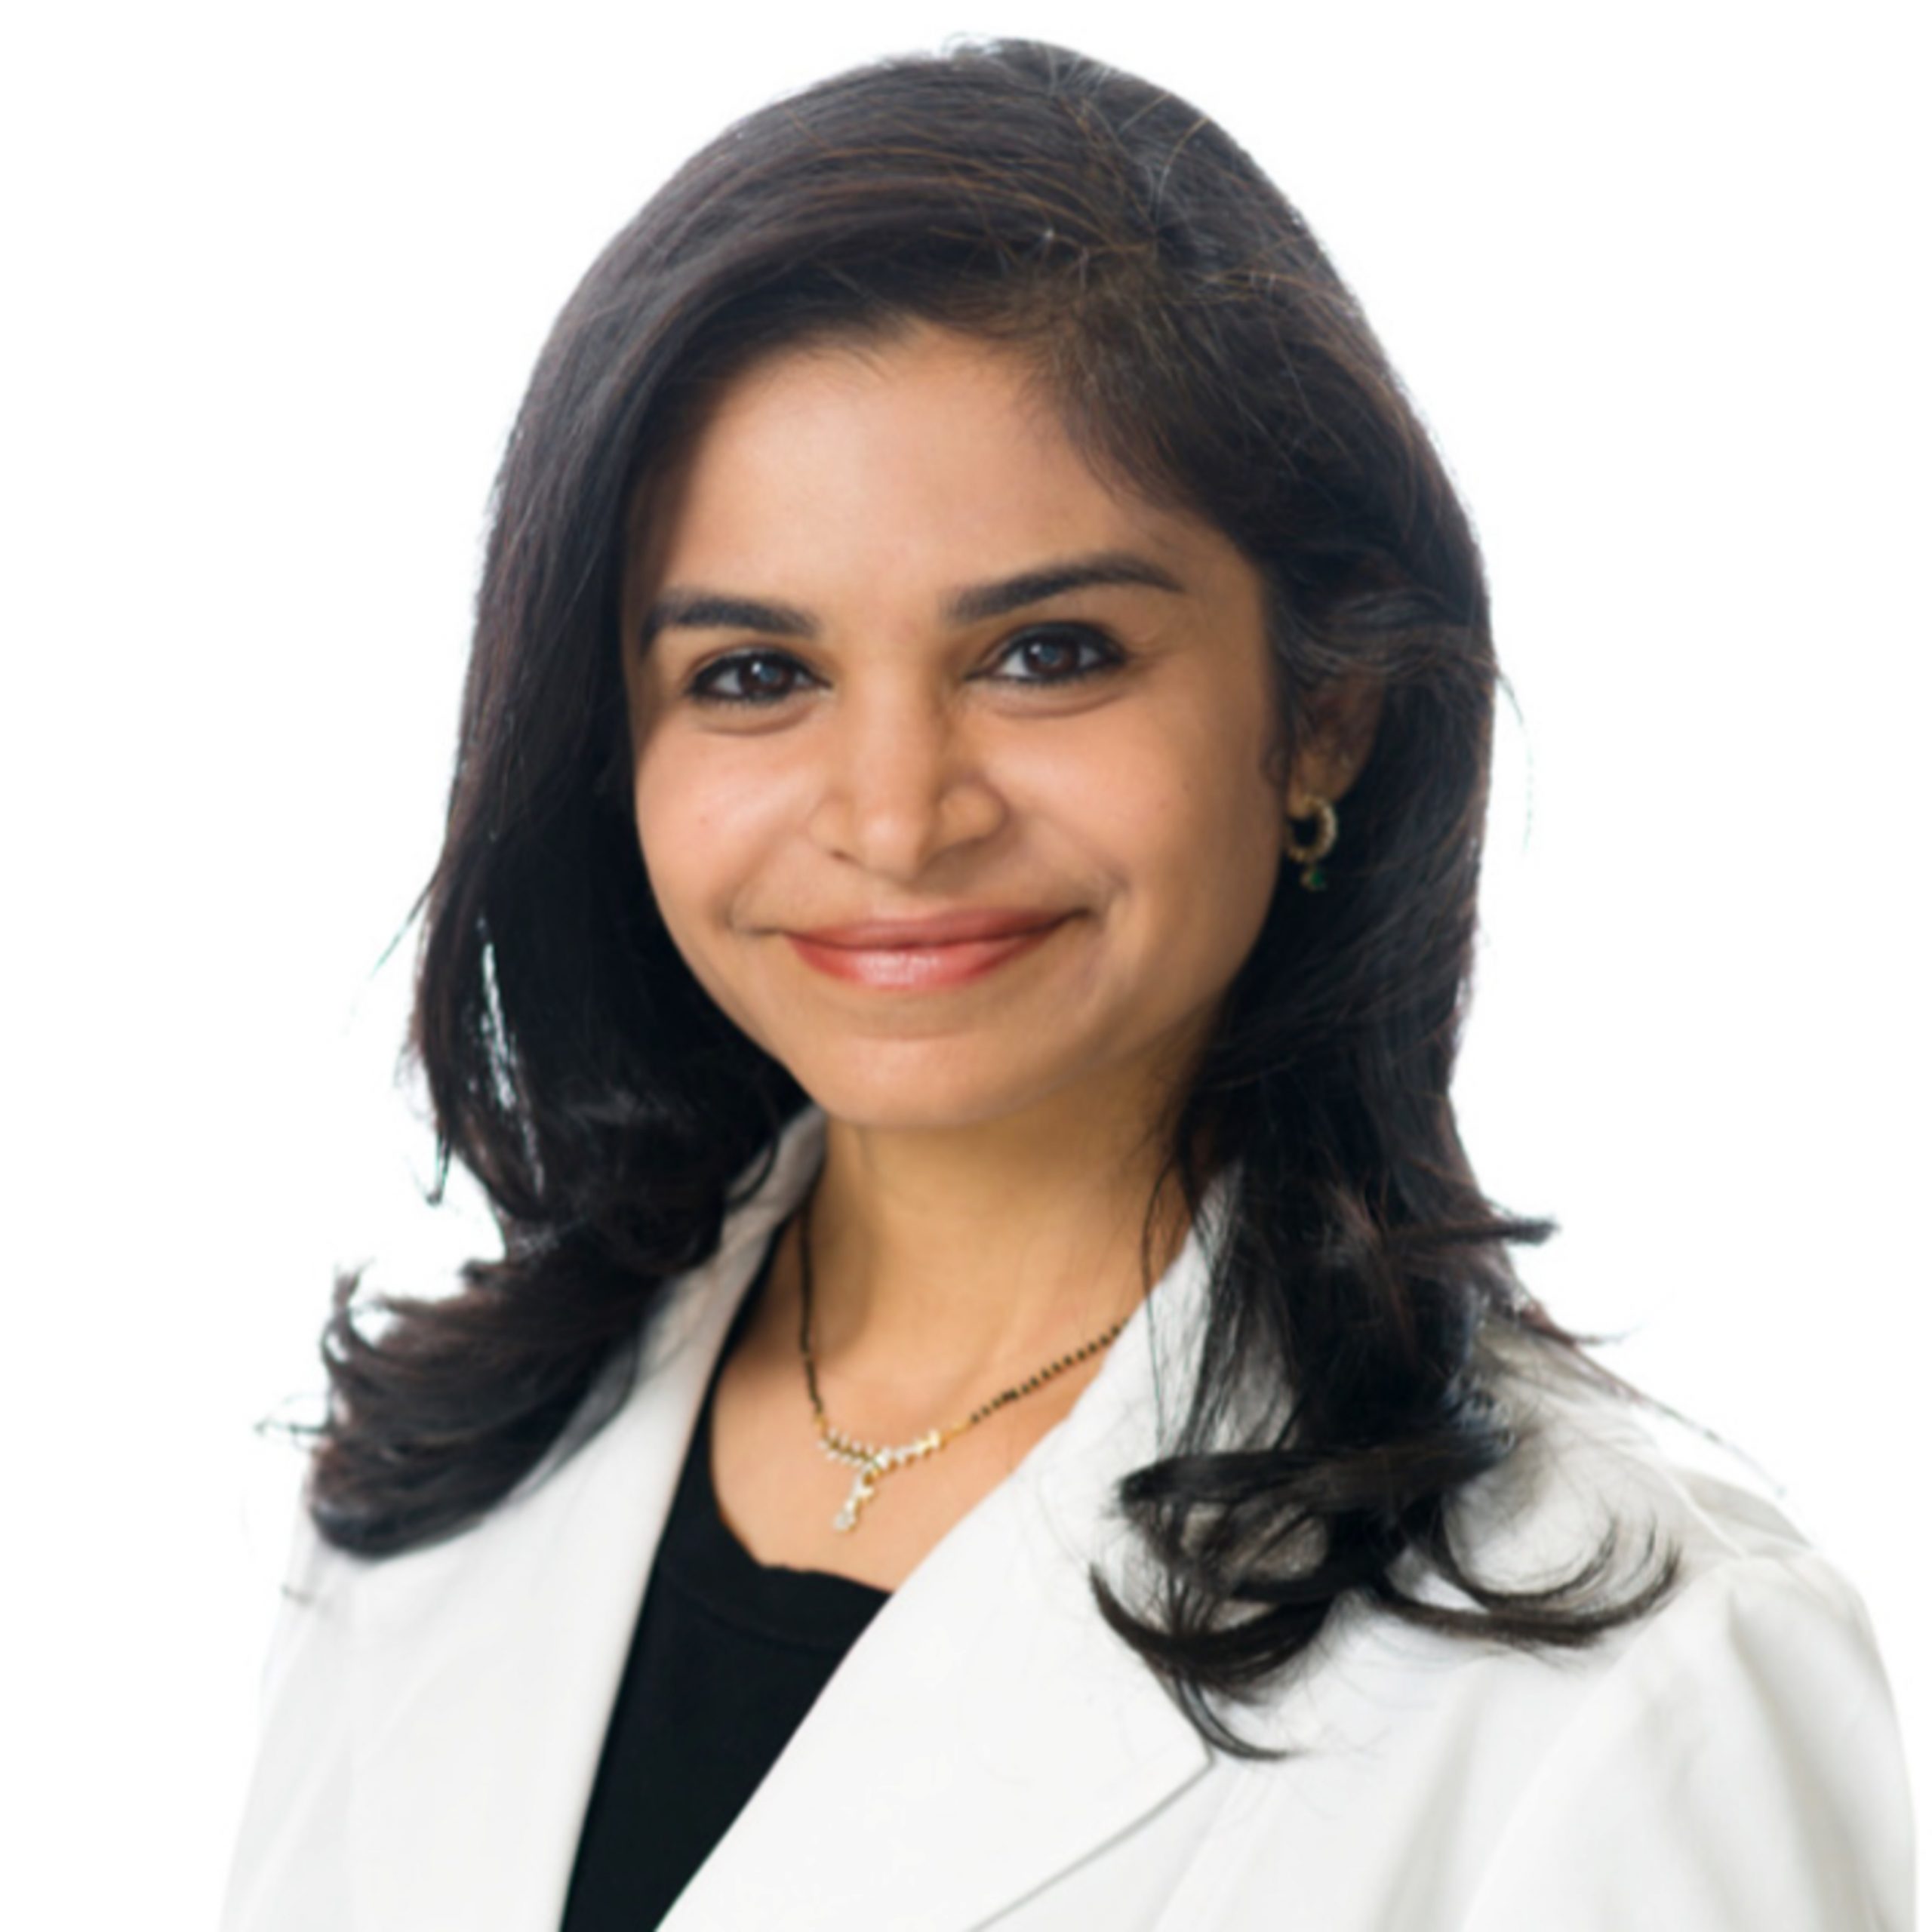 You are currently viewing Anita Bangale: An Emergency Medicine Physician’s Perspective on Healthcare